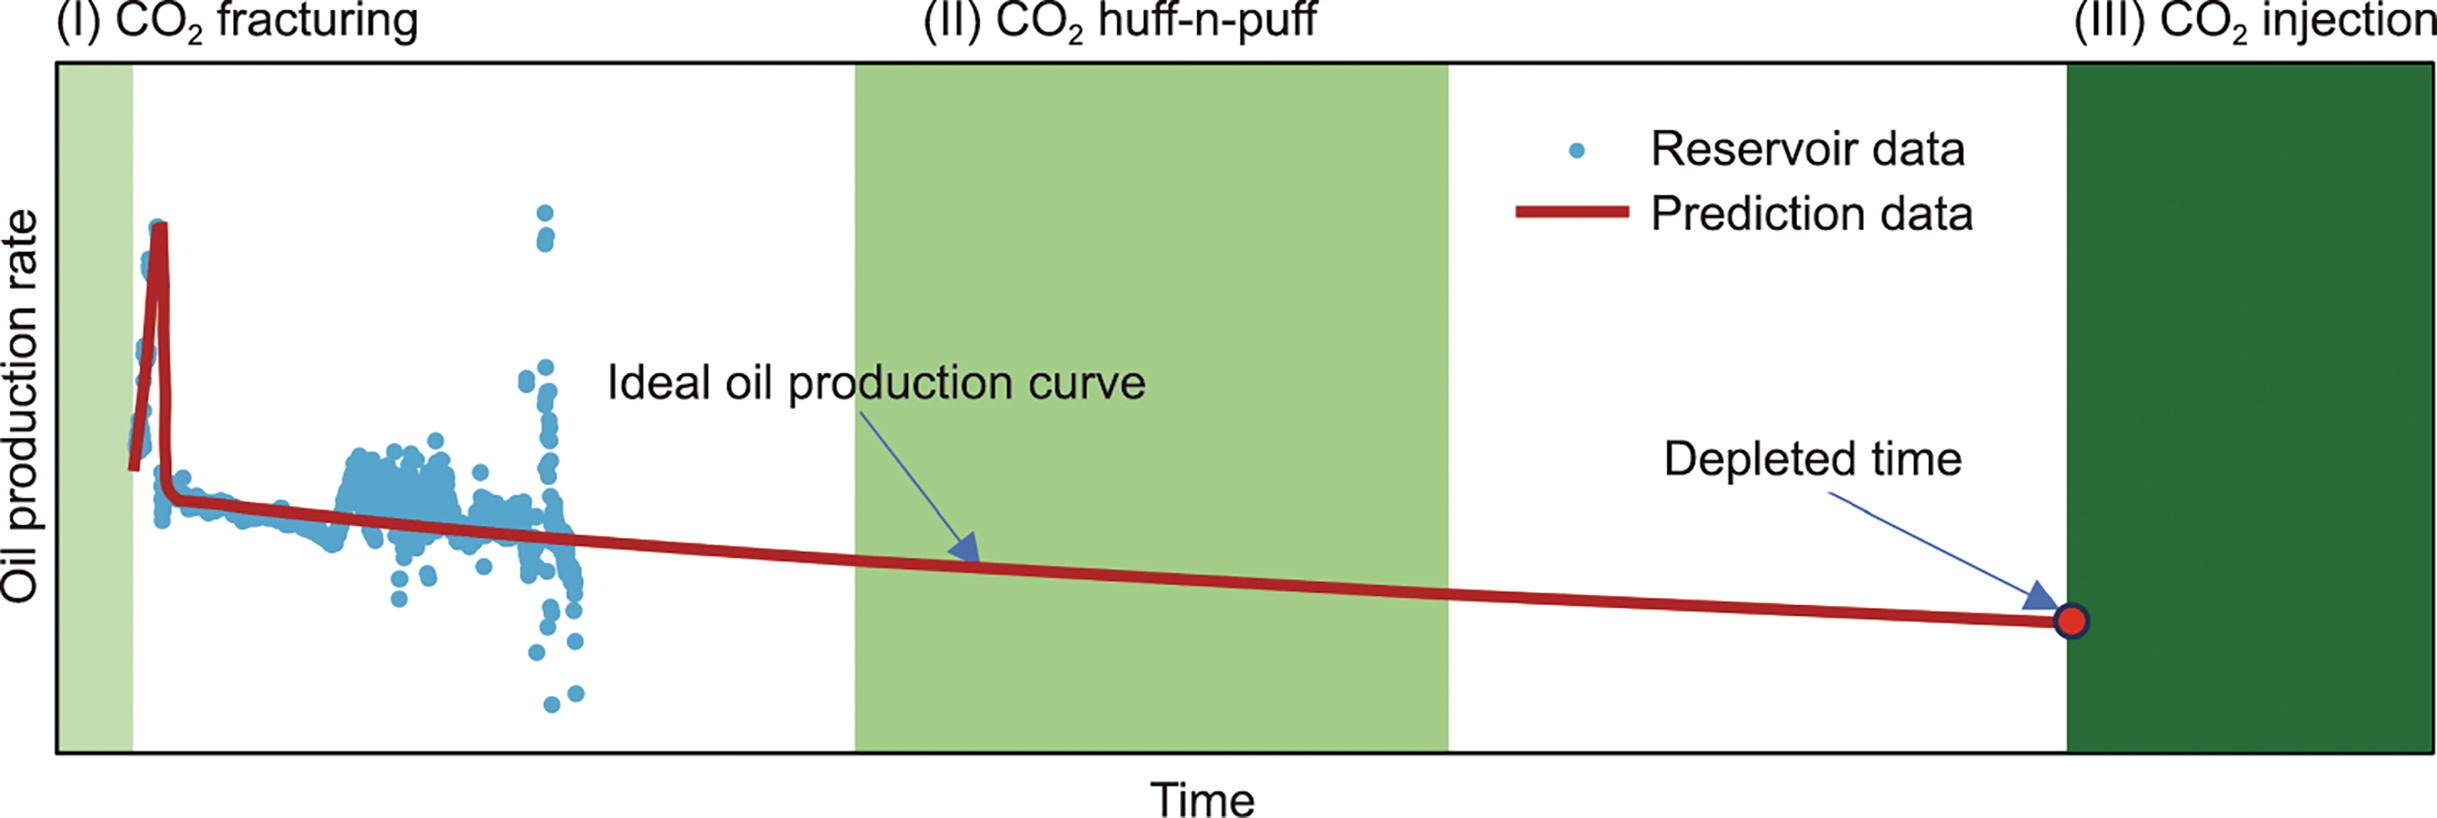 Study demonstrates high CO₂ storage efficiency in shale reservoirs using fracturing technology